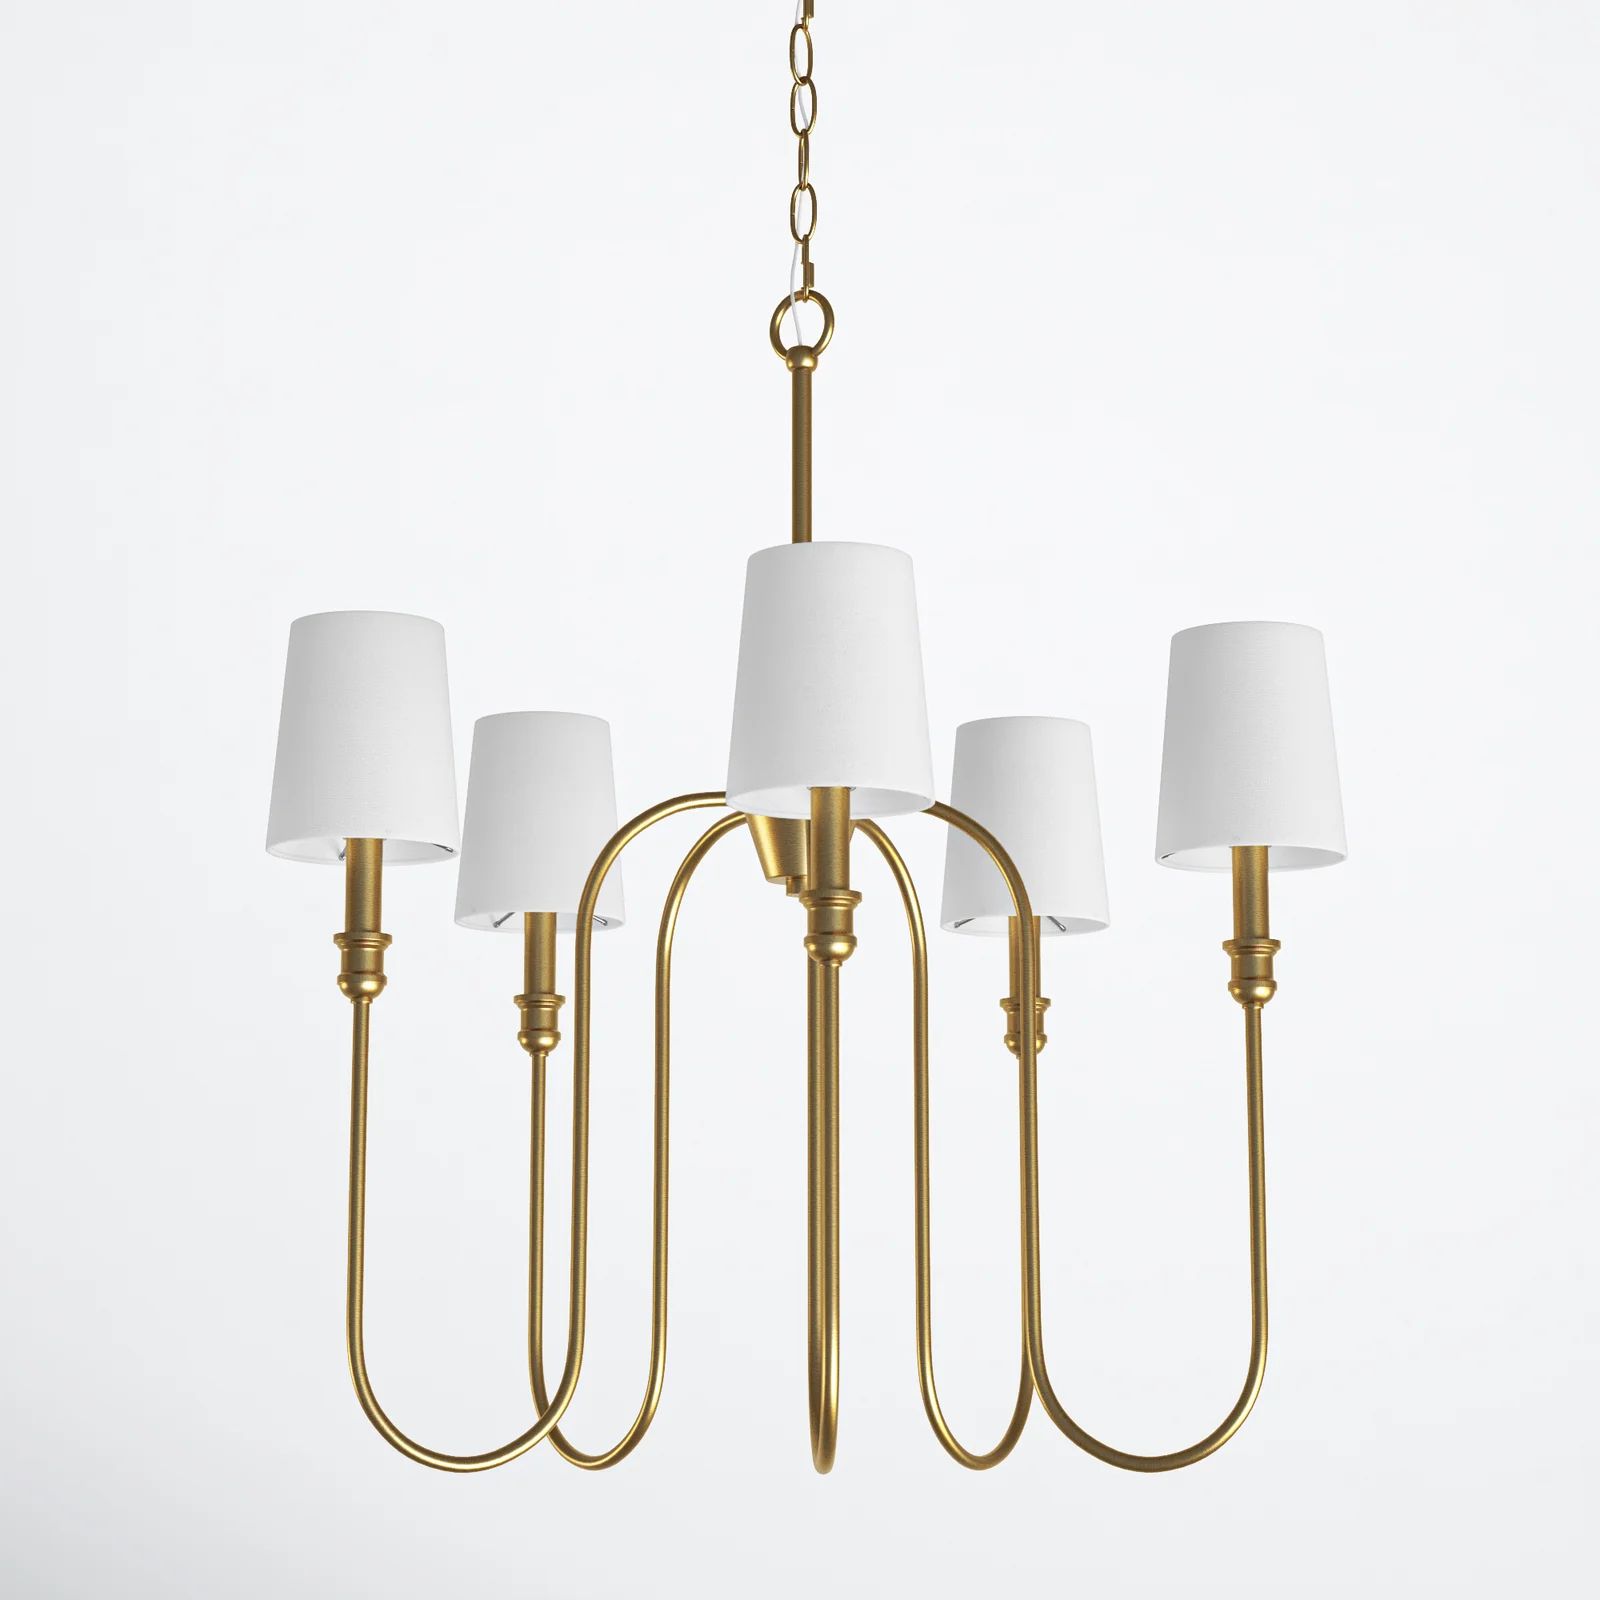 Sanibel Dimmable Classic / Traditional Chandelier | Wayfair North America